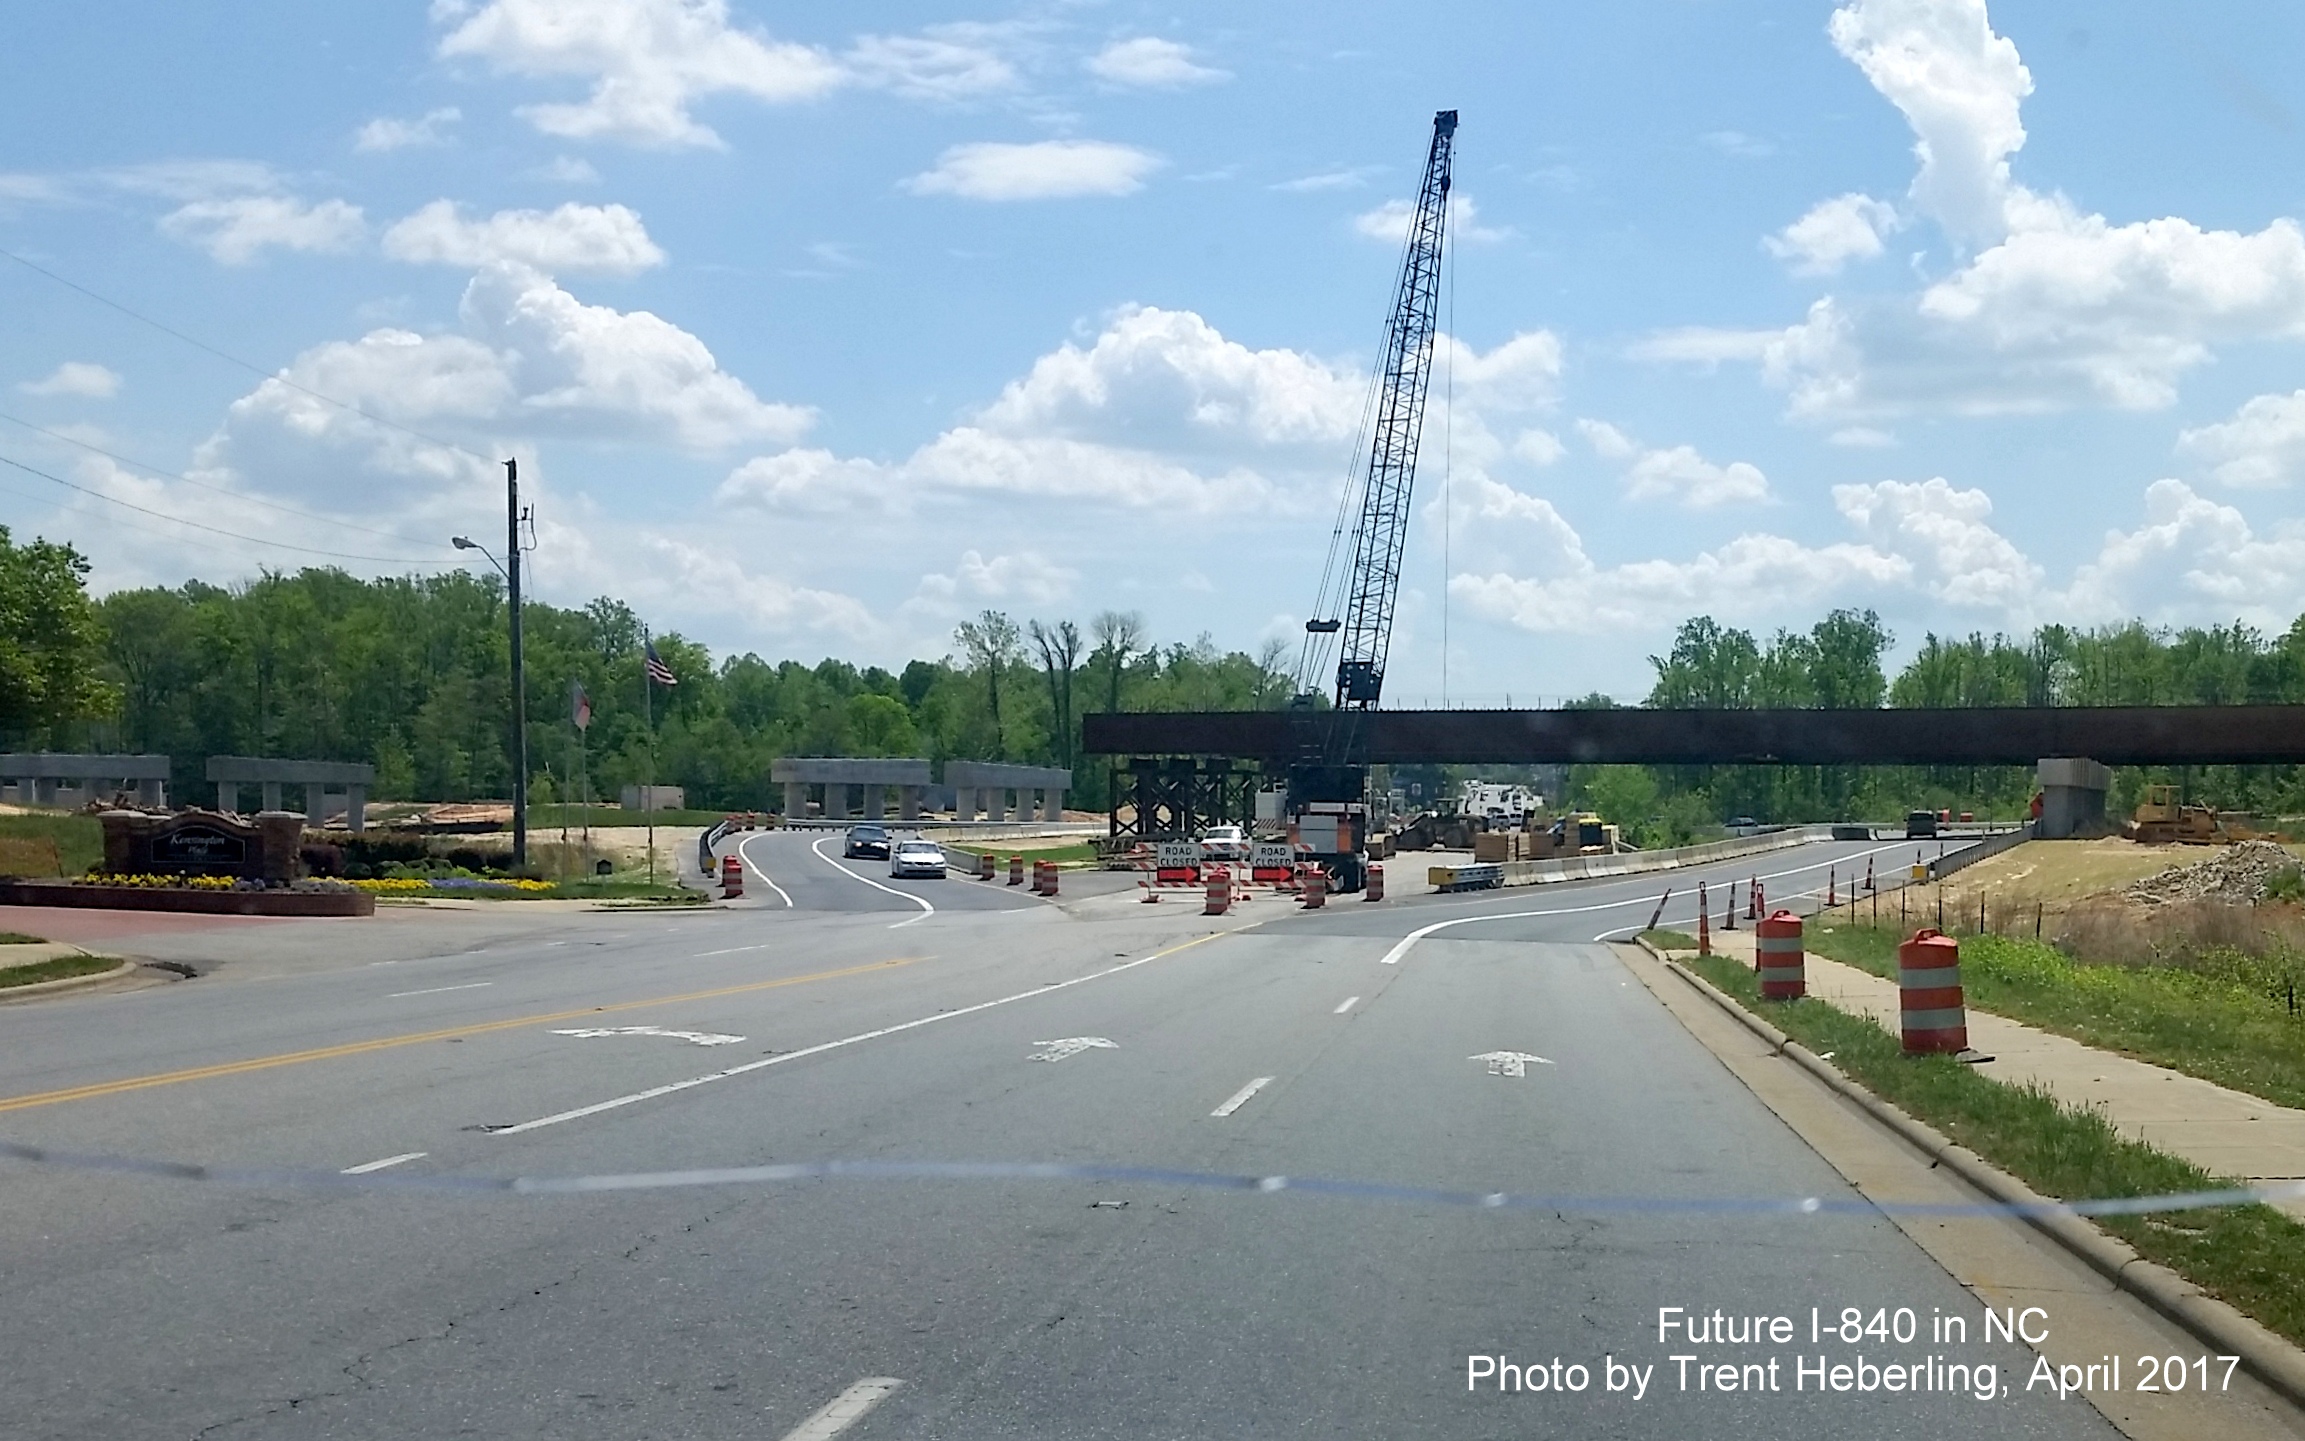 Image taken heading south on US 220/Battleground Ave approaching future I-840 interchange in Greensboro, by Trent Heberling